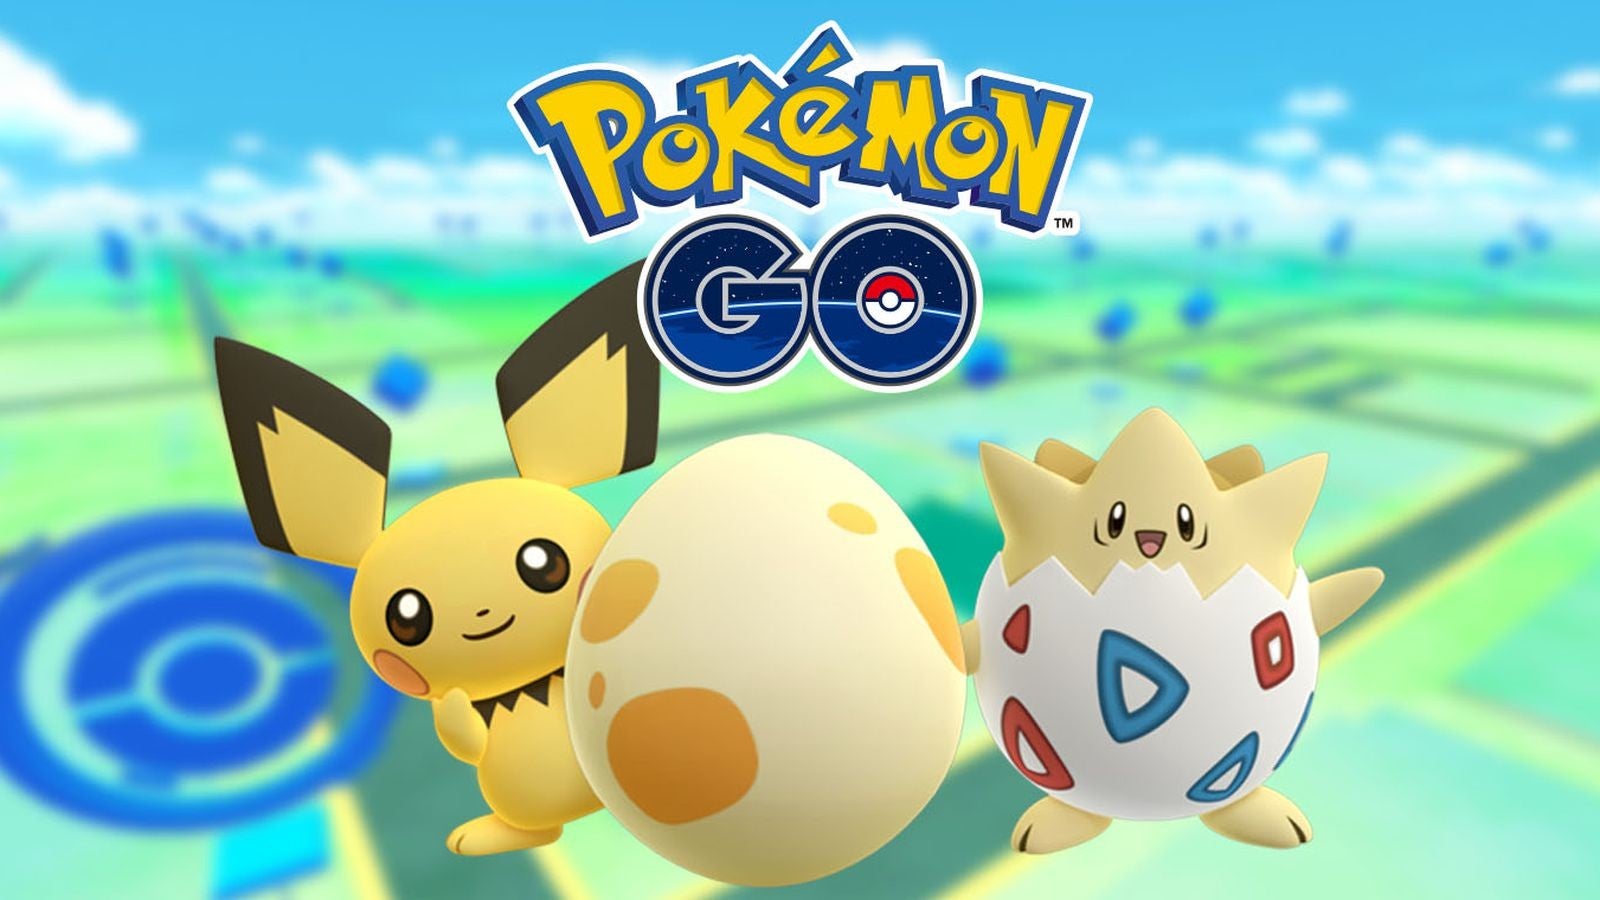 Pokemon GO now fully compatible with iPhone X, but drops support for iOS 8 devices